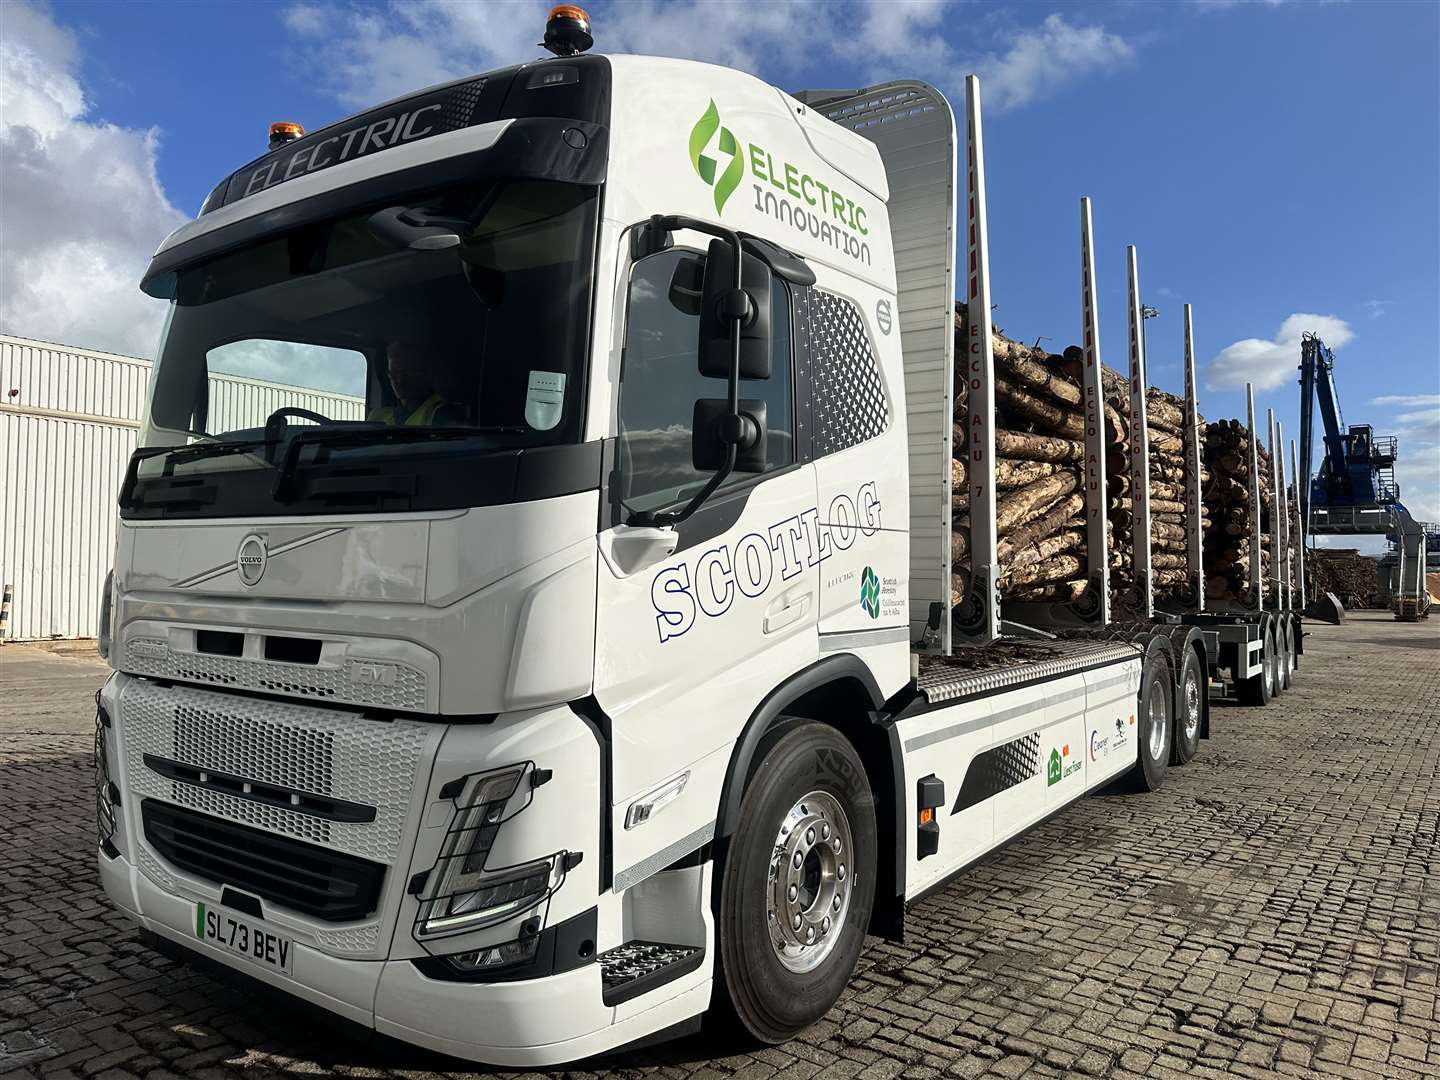 A new electric timber lorry is being trialled on Highland roads.